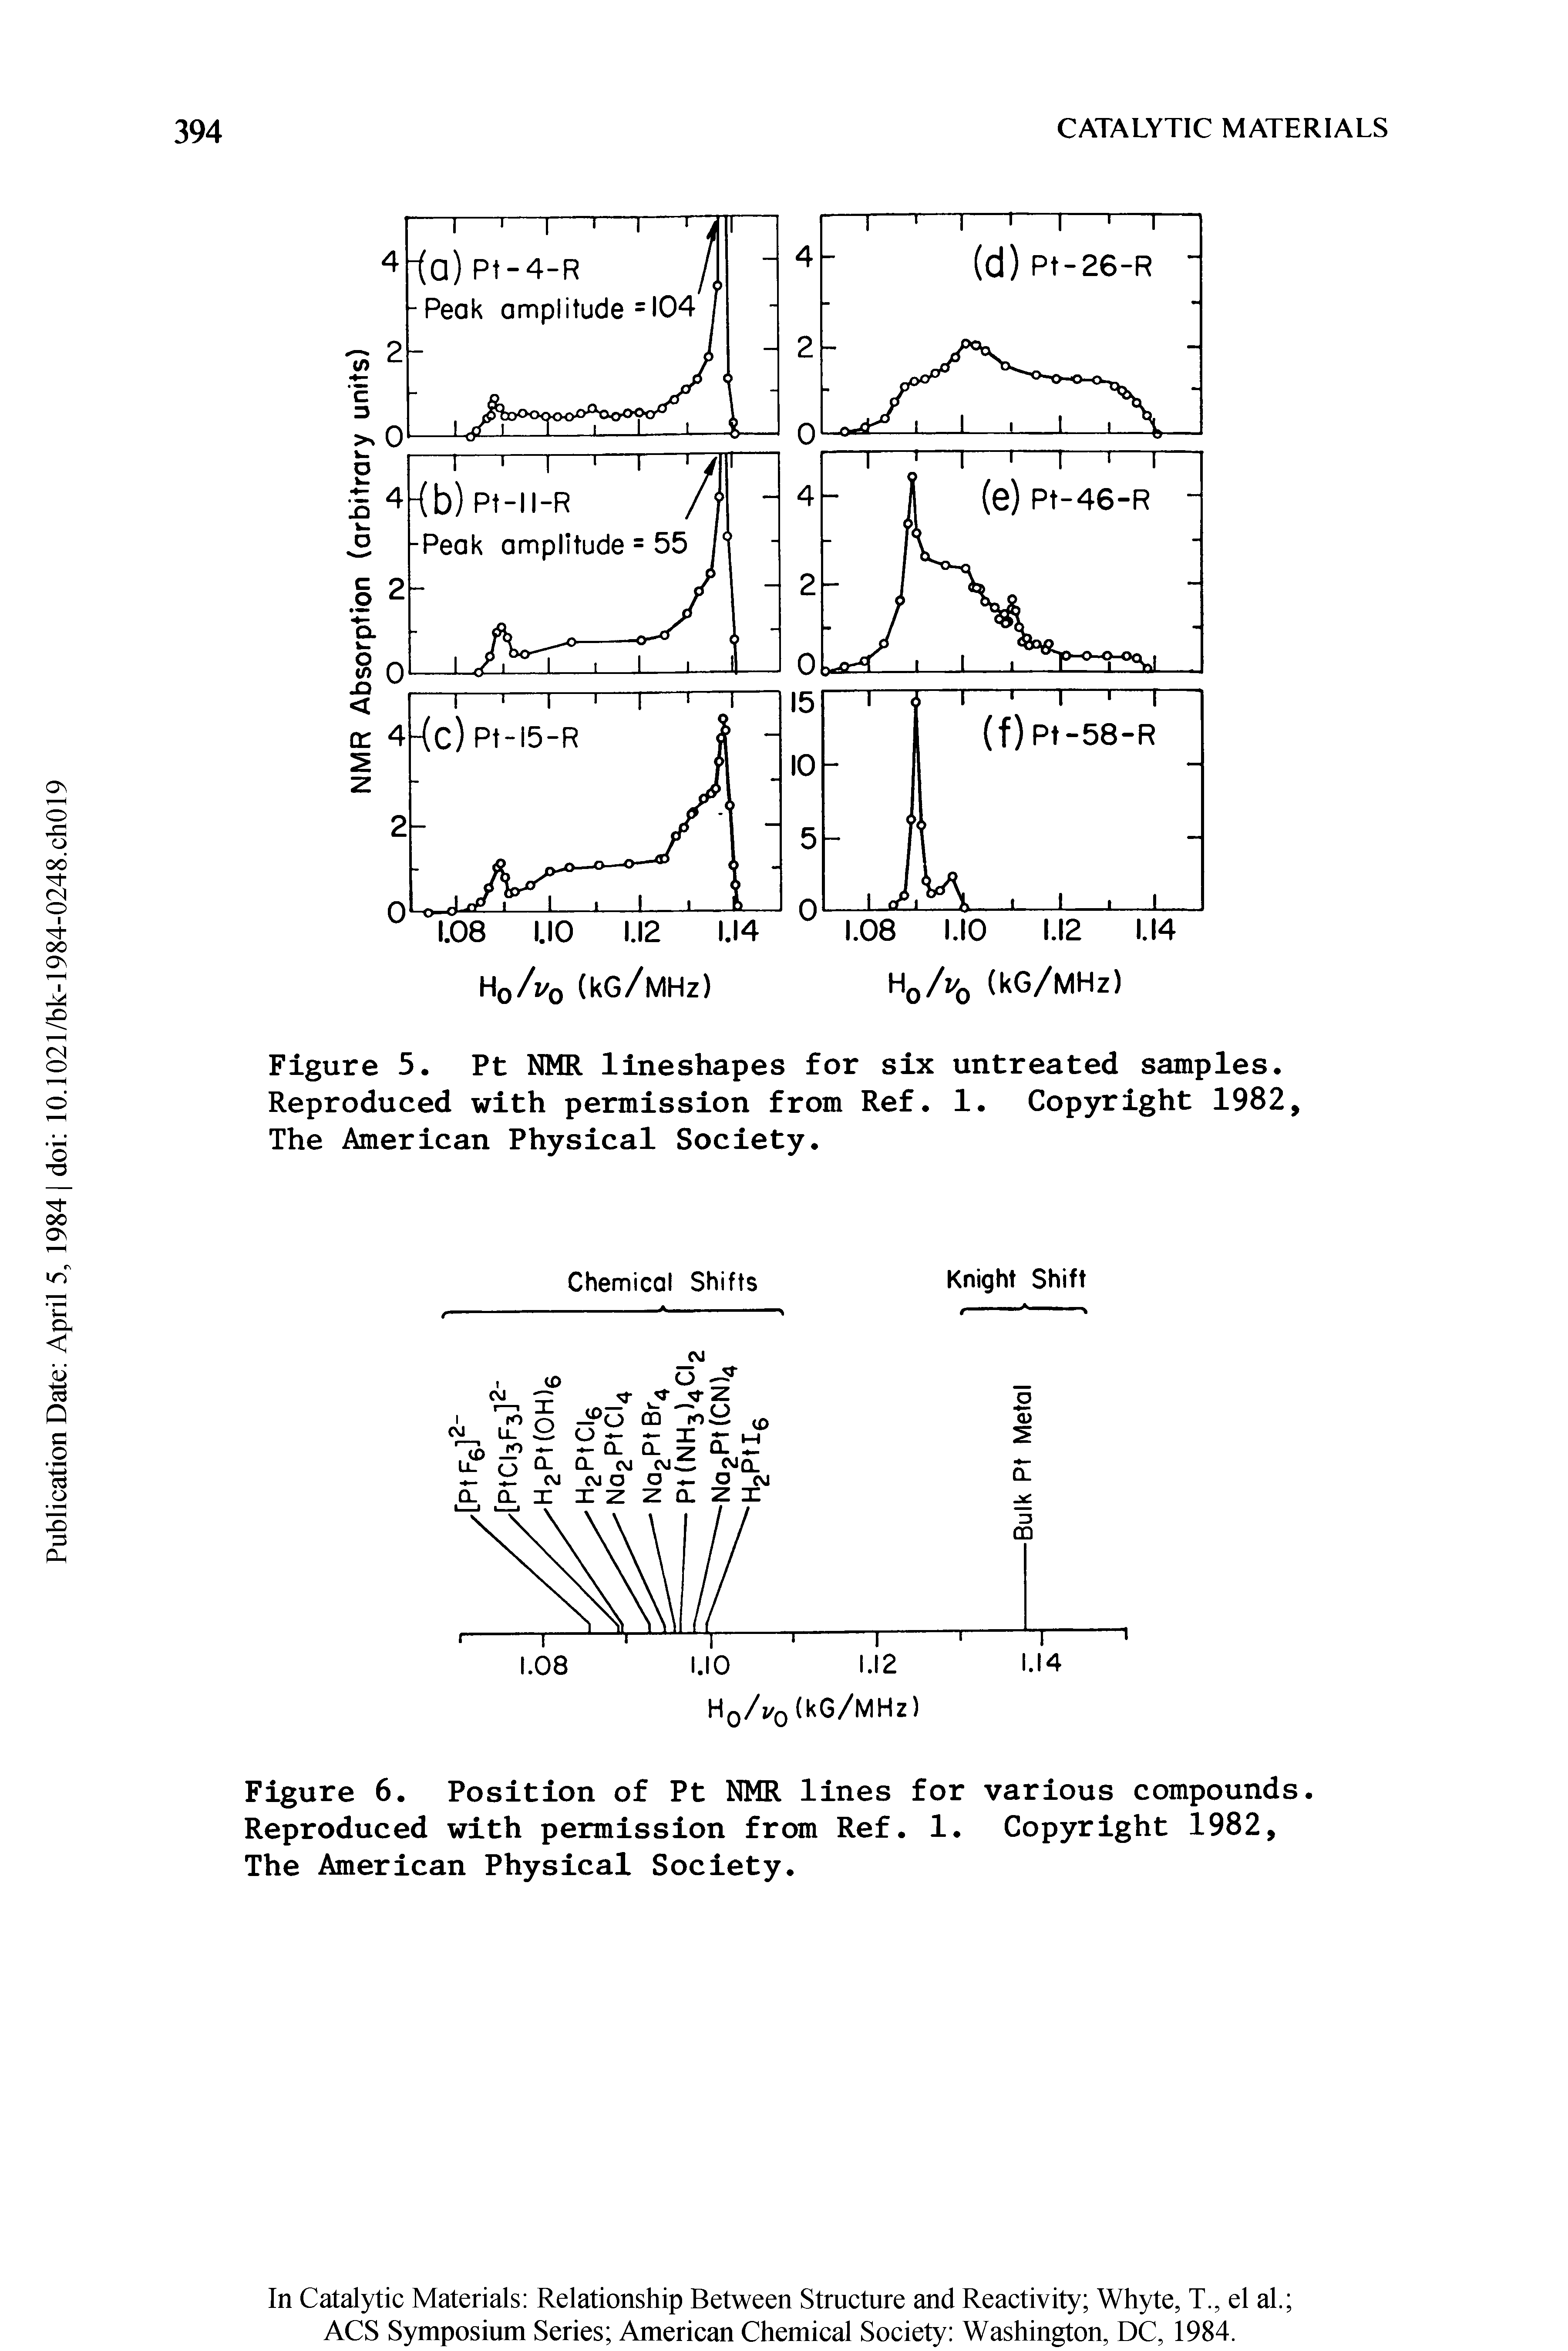 Figure 5. Pt NMR lineshapes for six untreated samples. Reproduced with permission from Ref. 1. Copyright 1982, The American Physical Society.